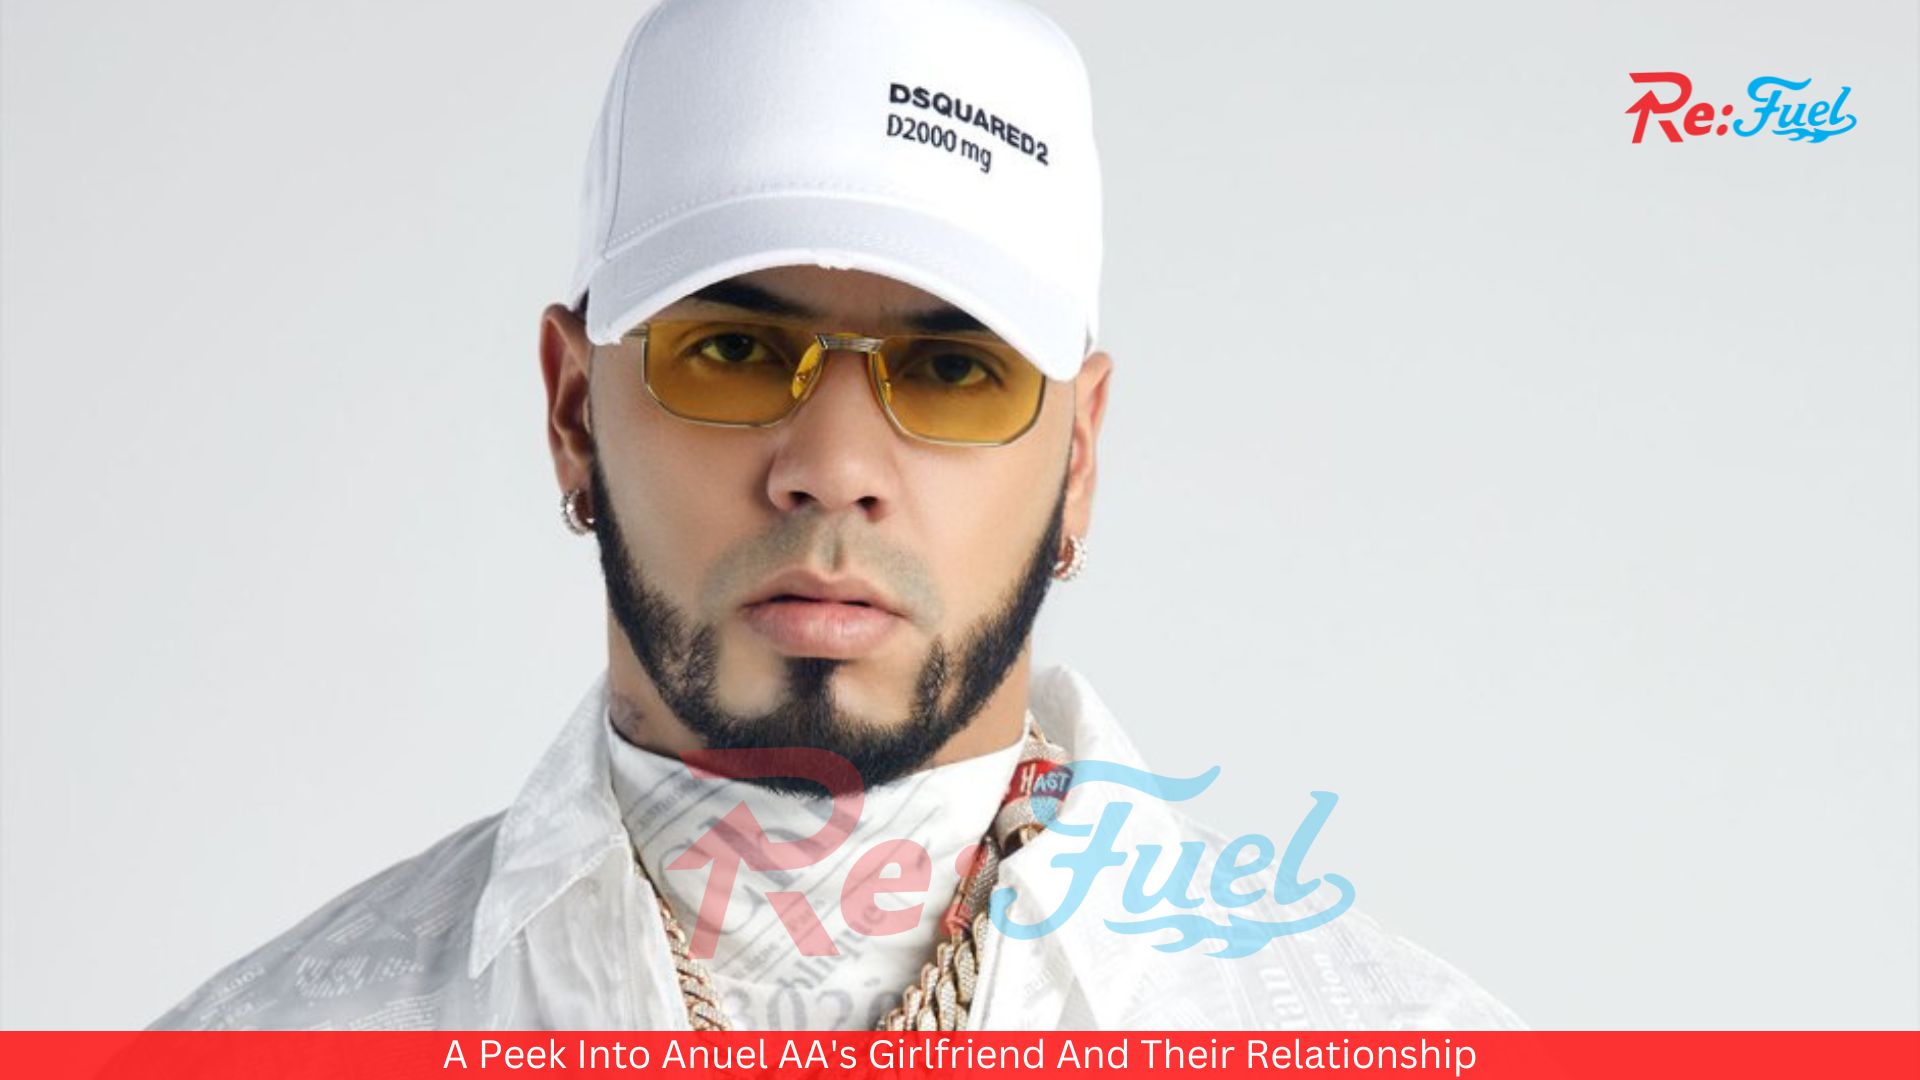 A Peek Into Anuel AA's Girlfriend And Their Relationship